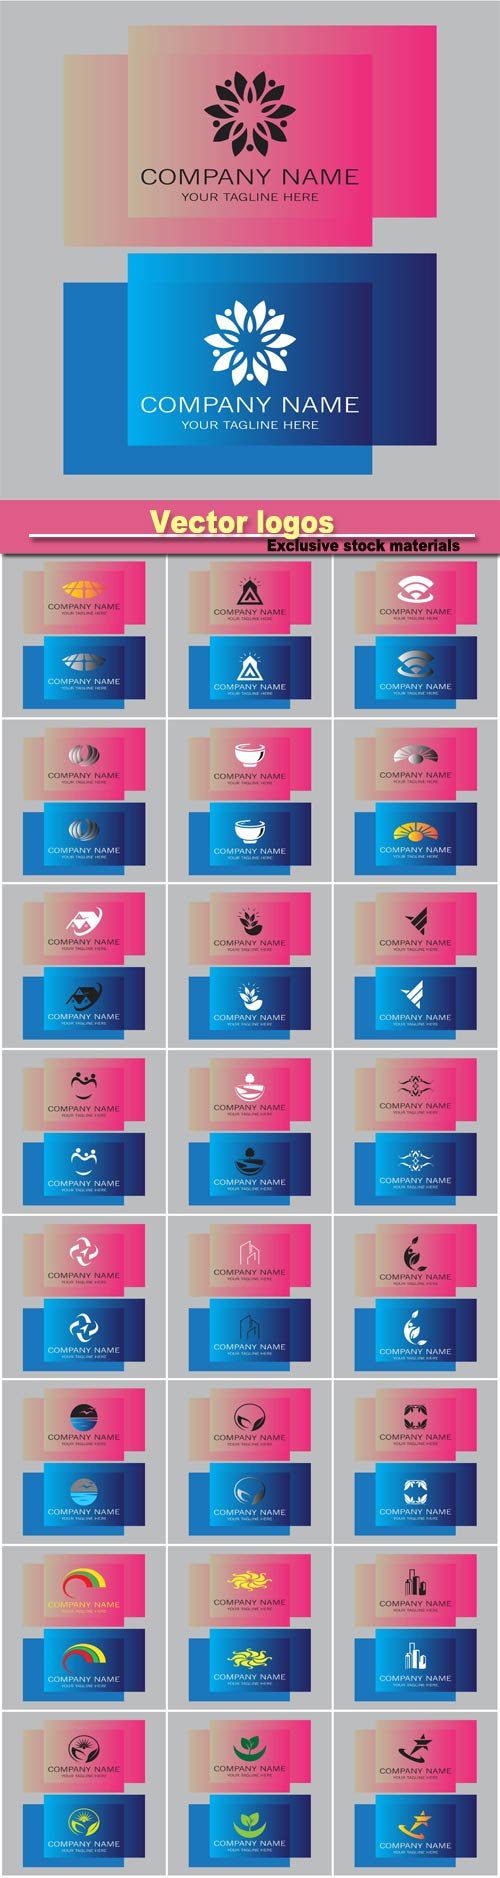 Vector business logos on the pink and blue backgrounds